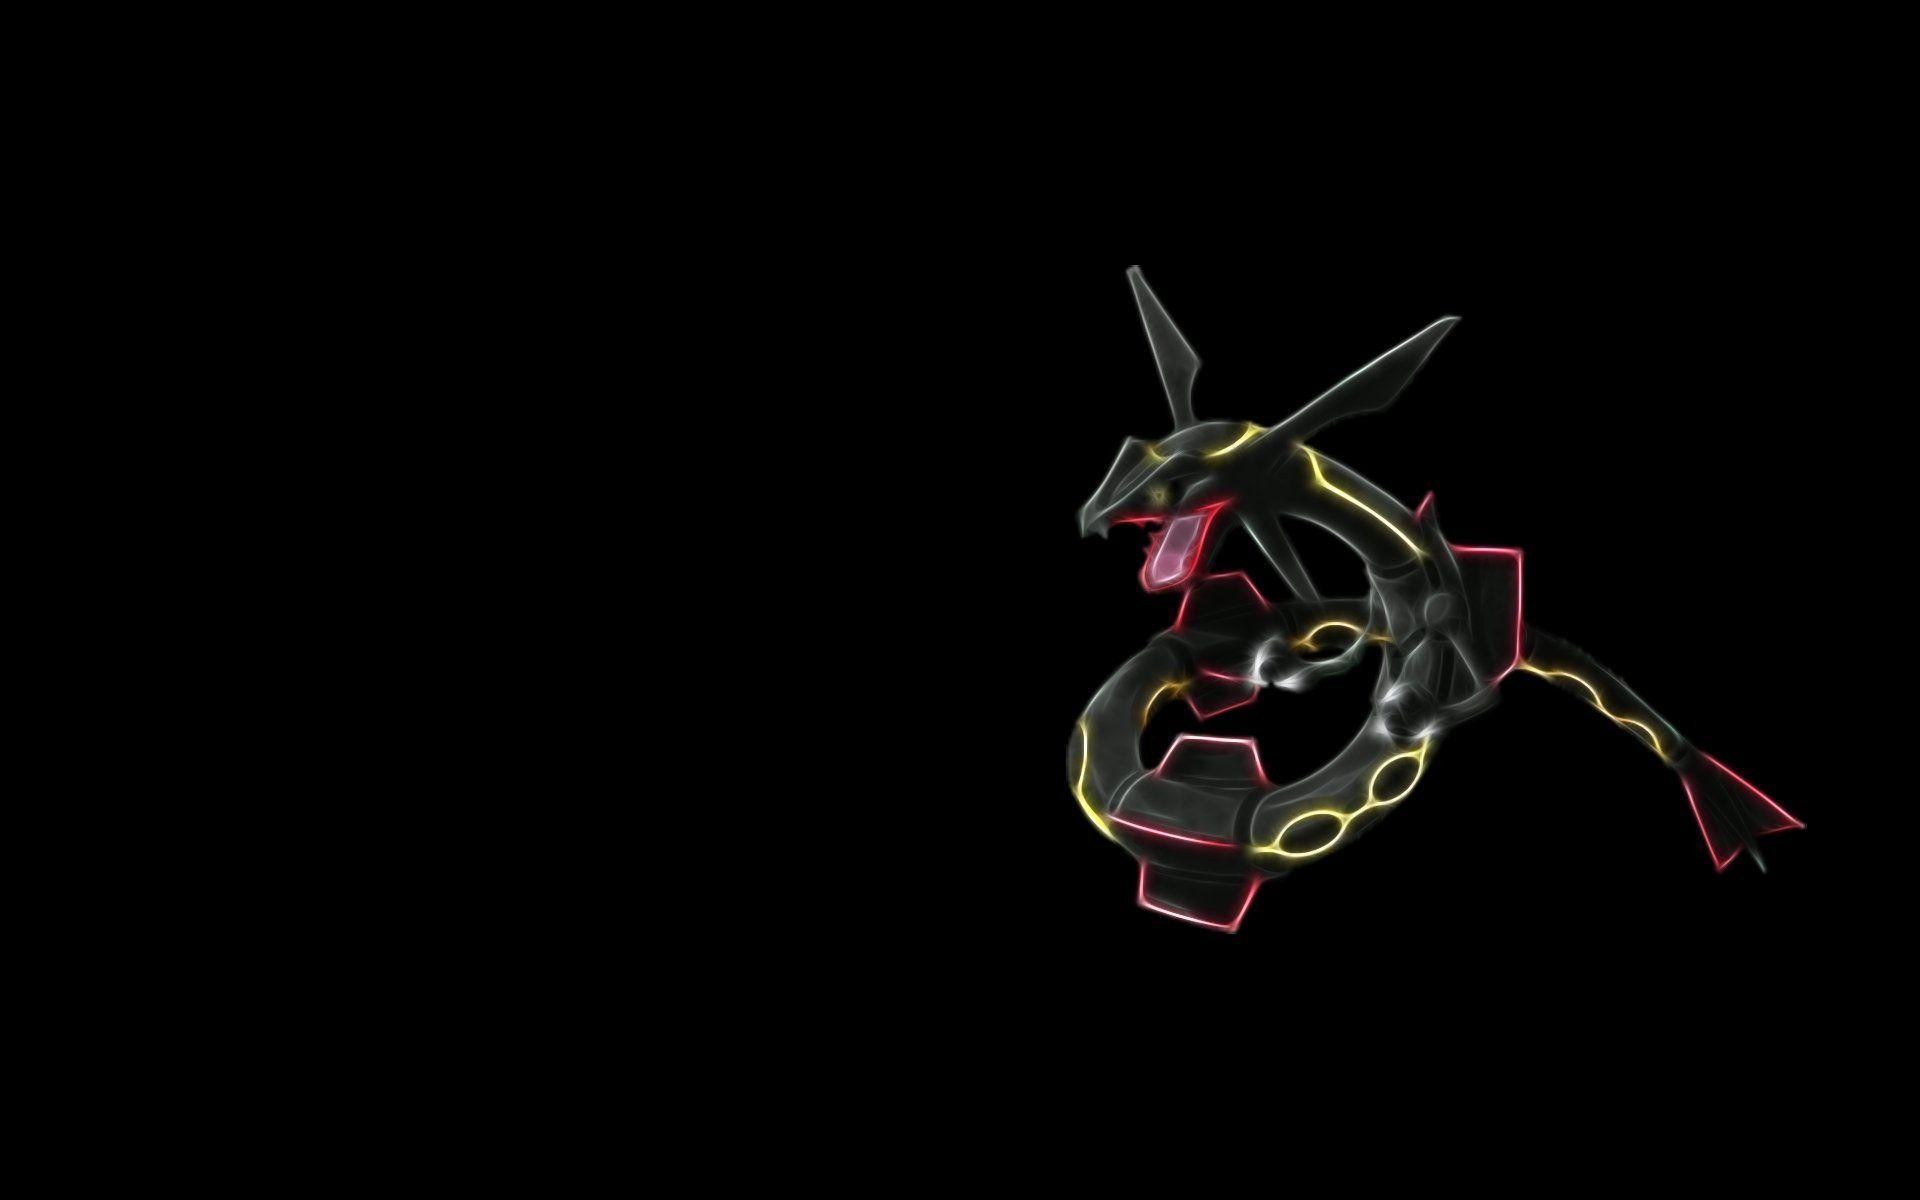 1920x1200 Pokemon Rayquaza Kyogre Groudon Vs High Quality Wallpapers, HQ .